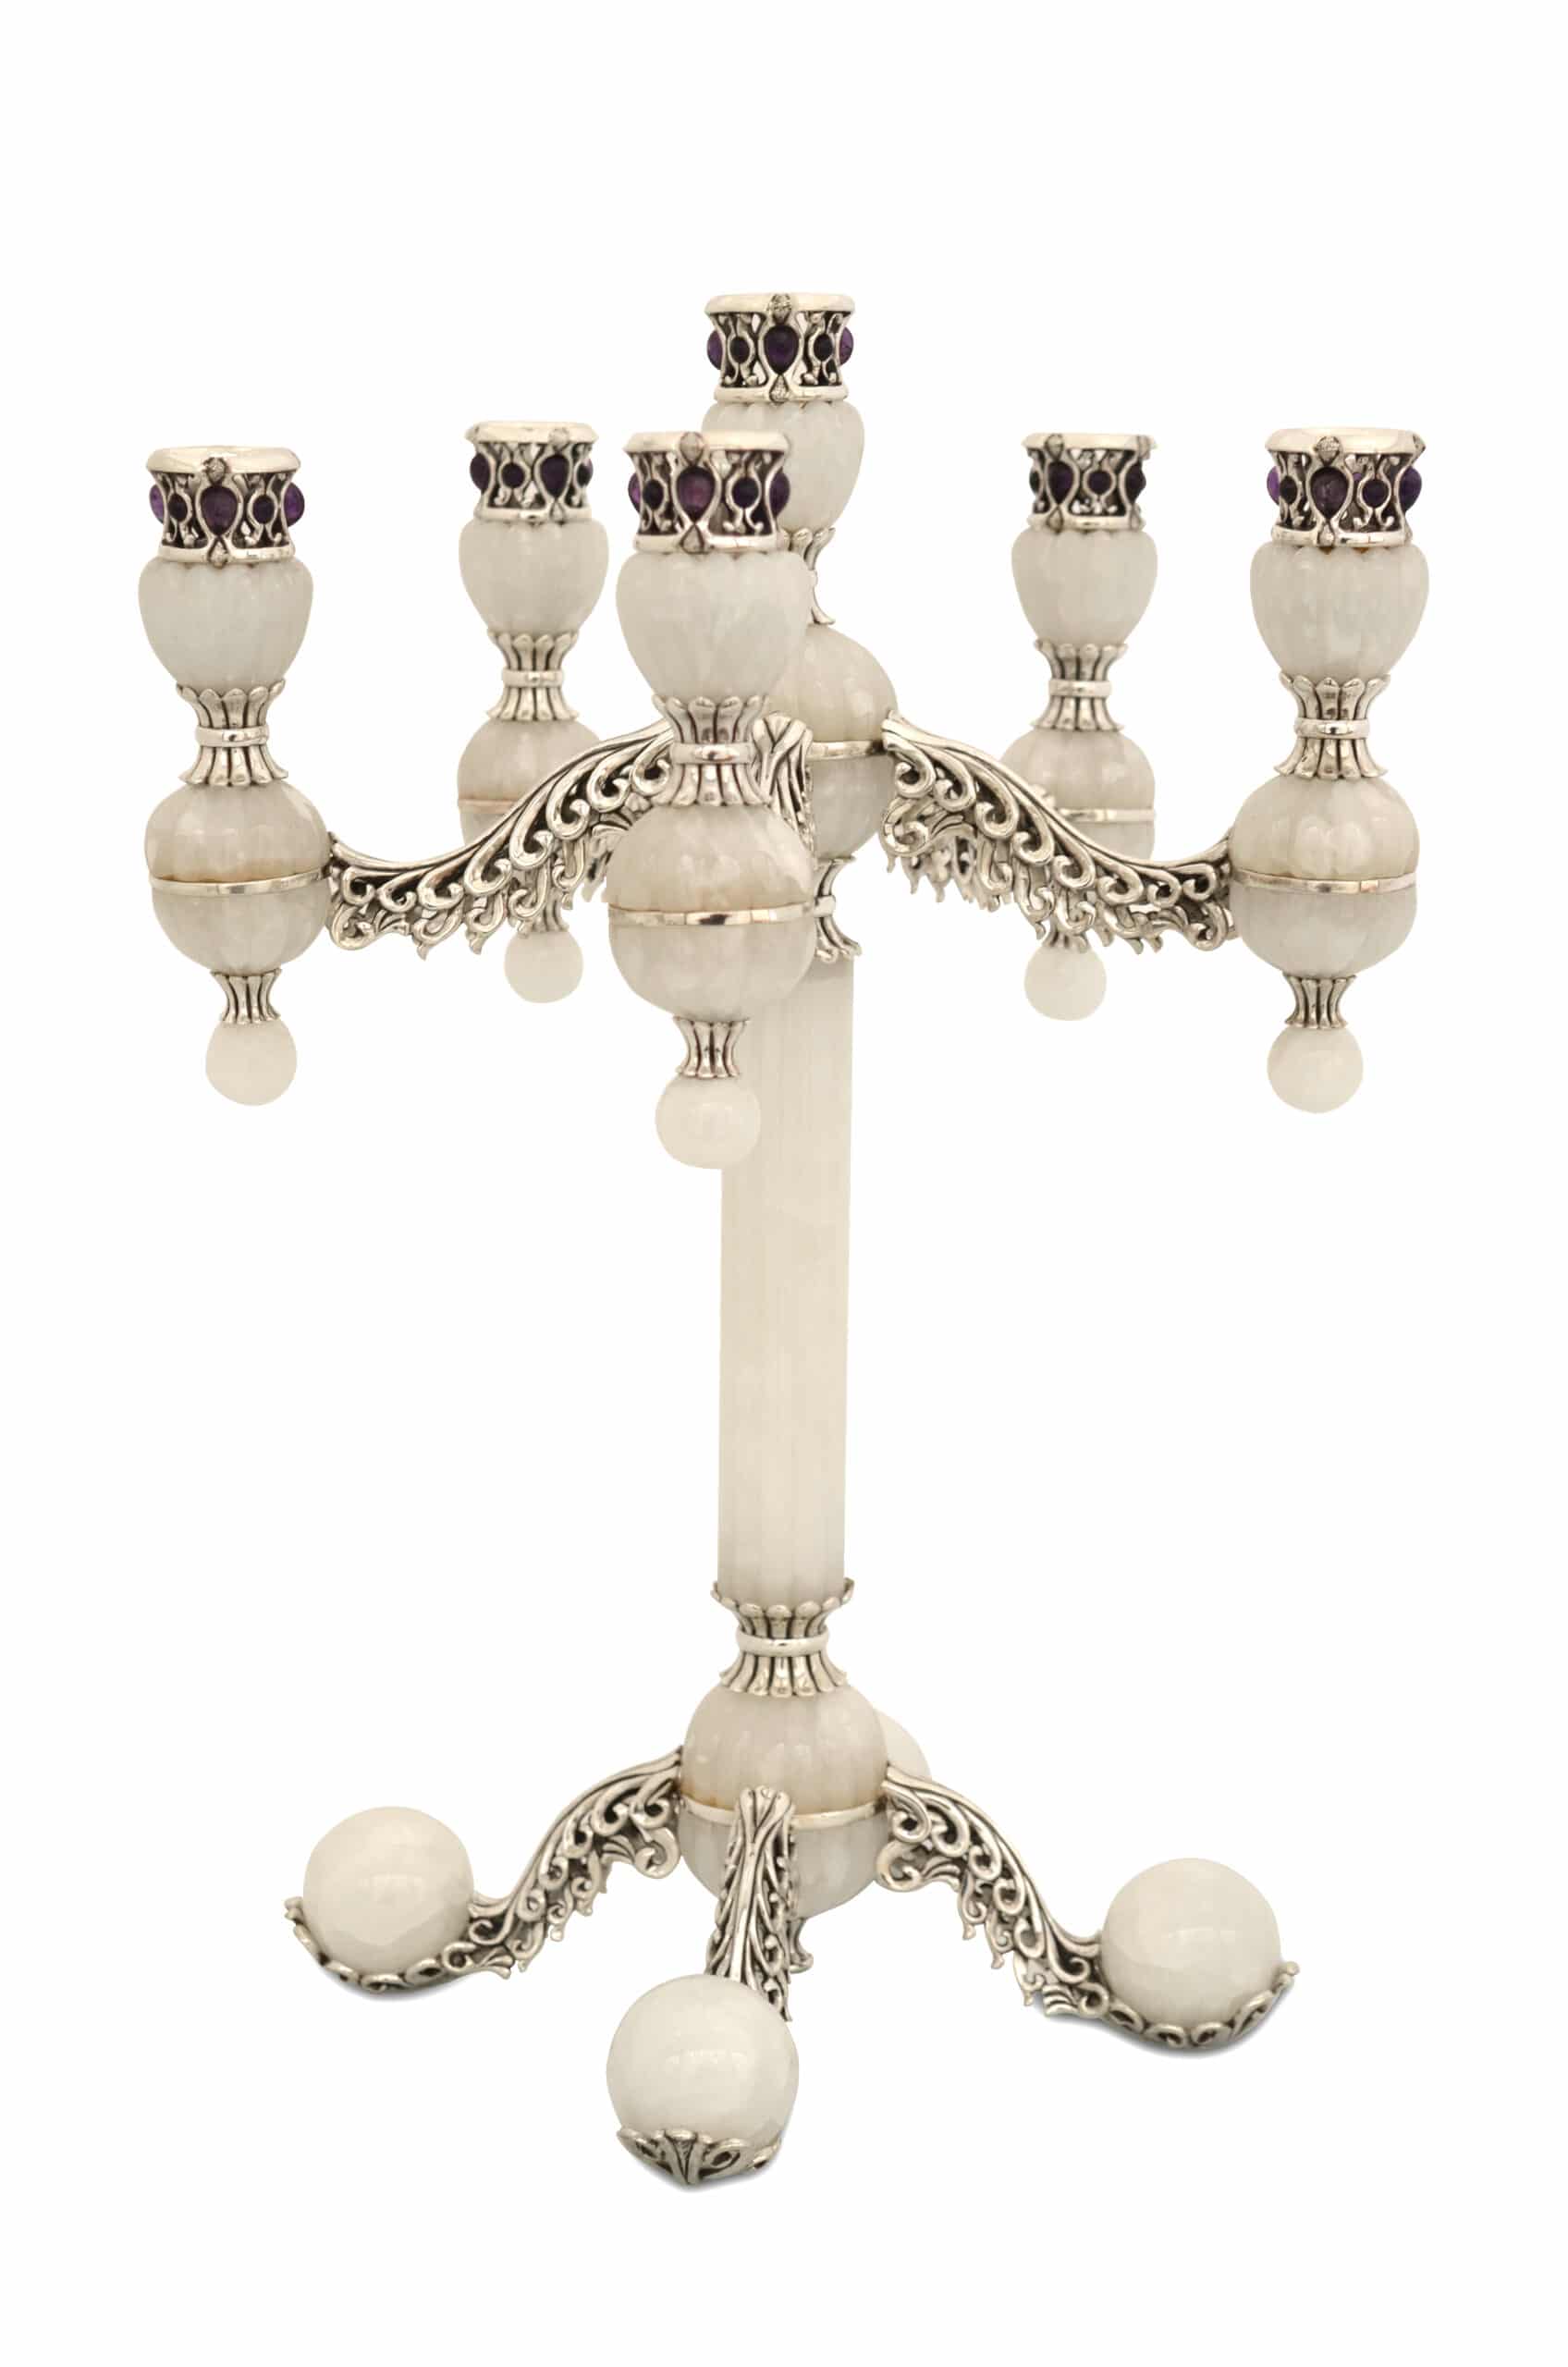 Candelabra with Amethyst Stones and Onyx Arms